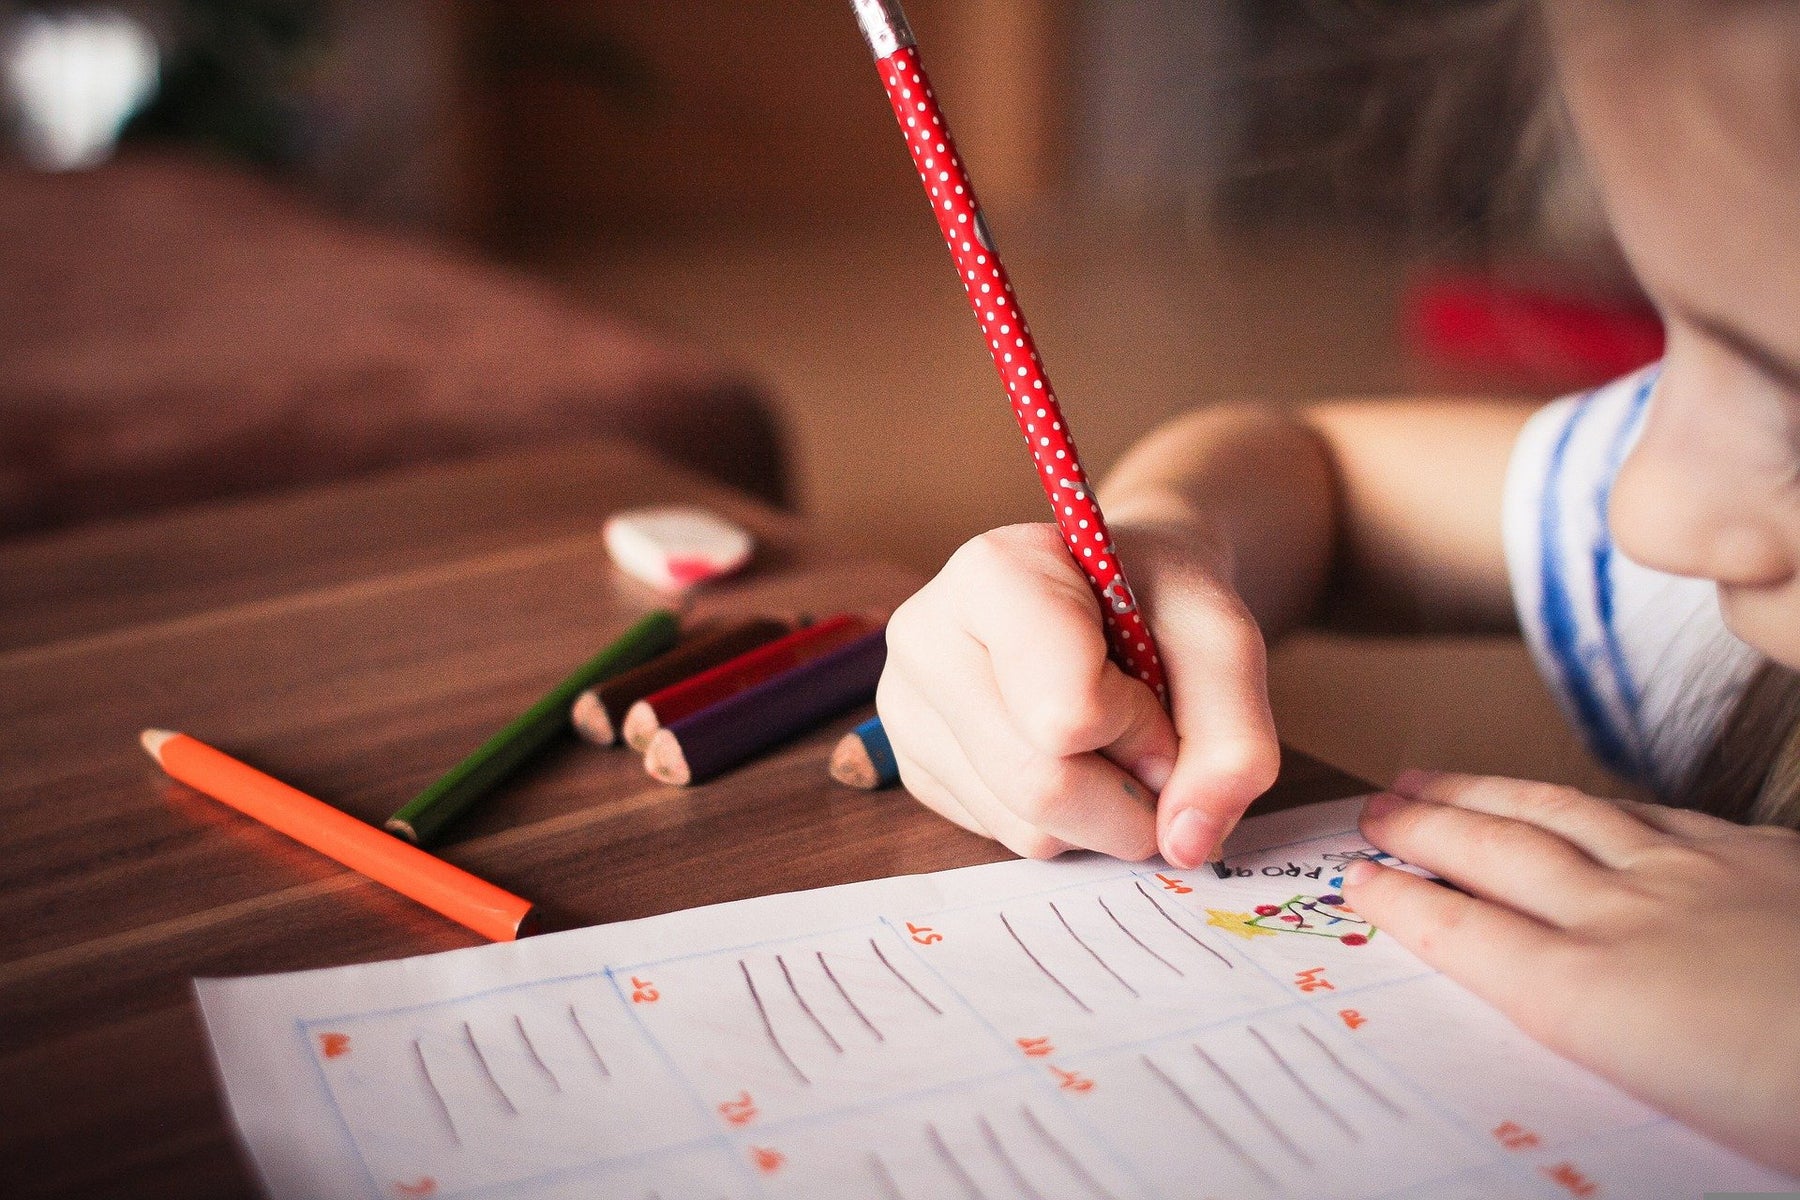 Help Your Child Prepare For School Exams & Tests